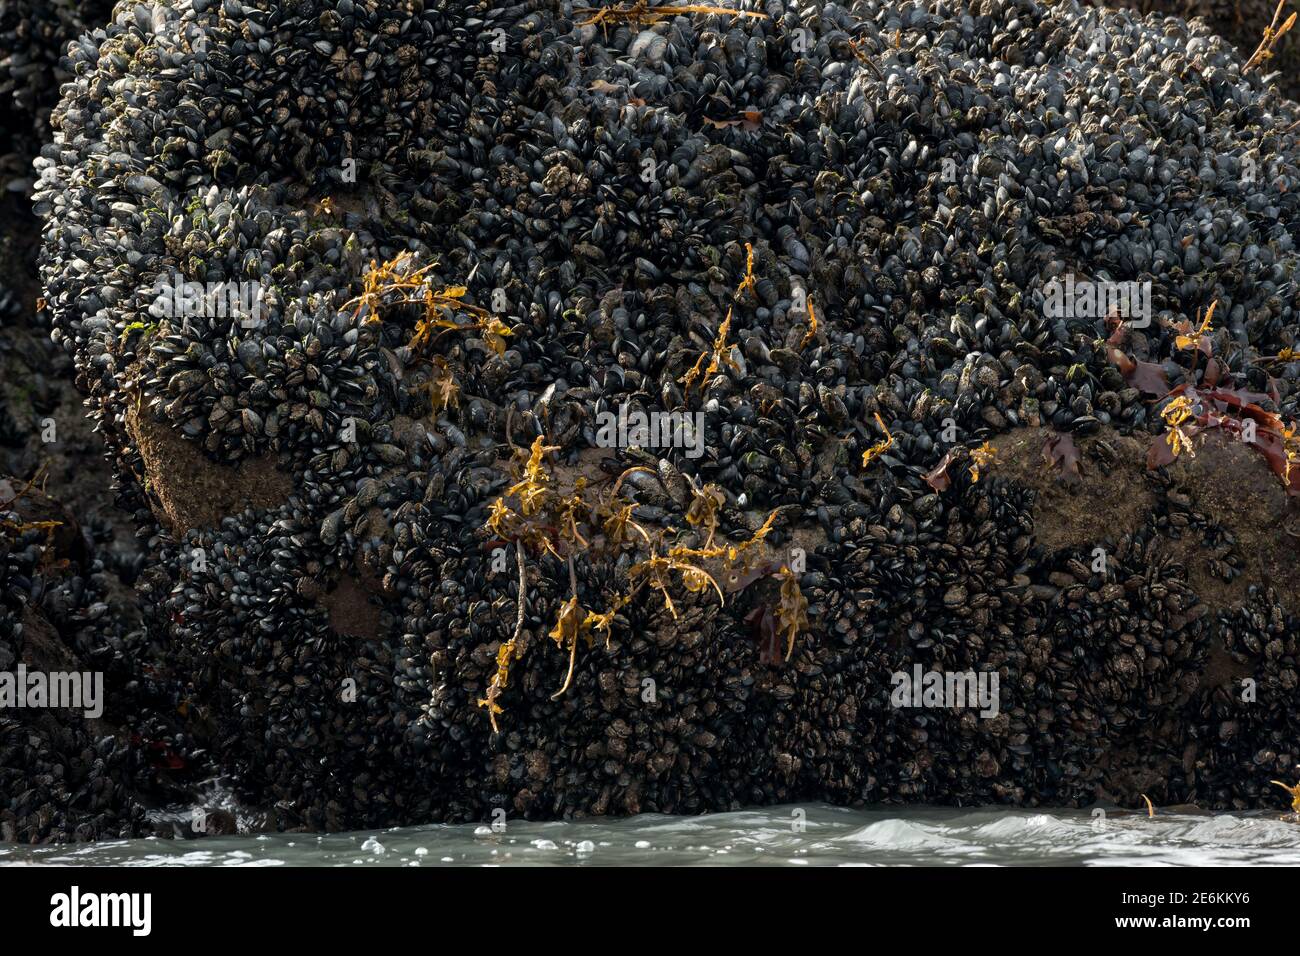 Saltwater mussels (Mytilidae) growing on the rocky ocean shore of Alaska, USA. Stock Photo